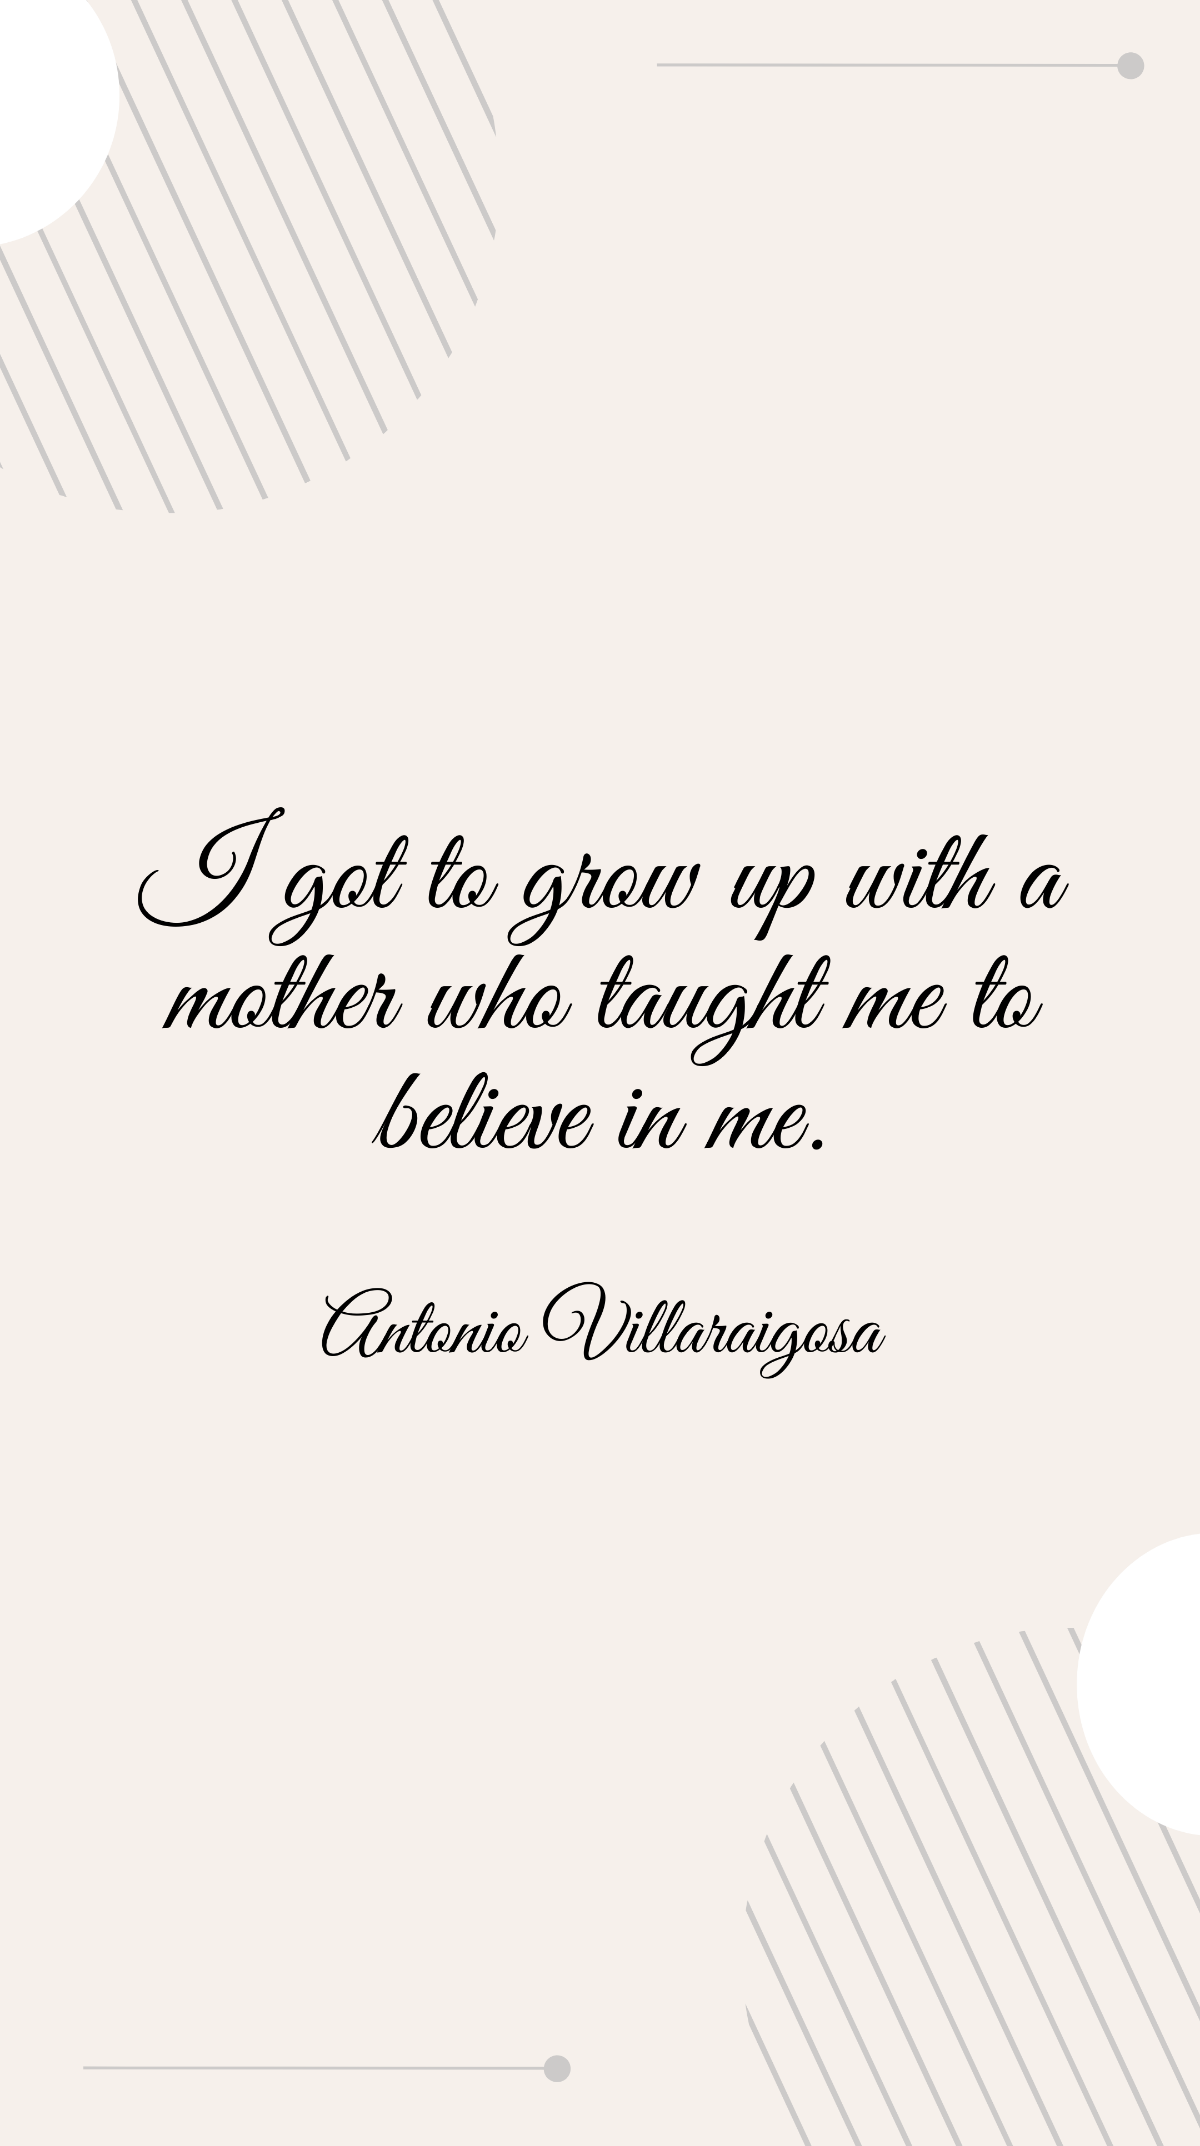  Antonio Villaraigosa - I got to grow up with a mother who taught me to believe in me.  Template